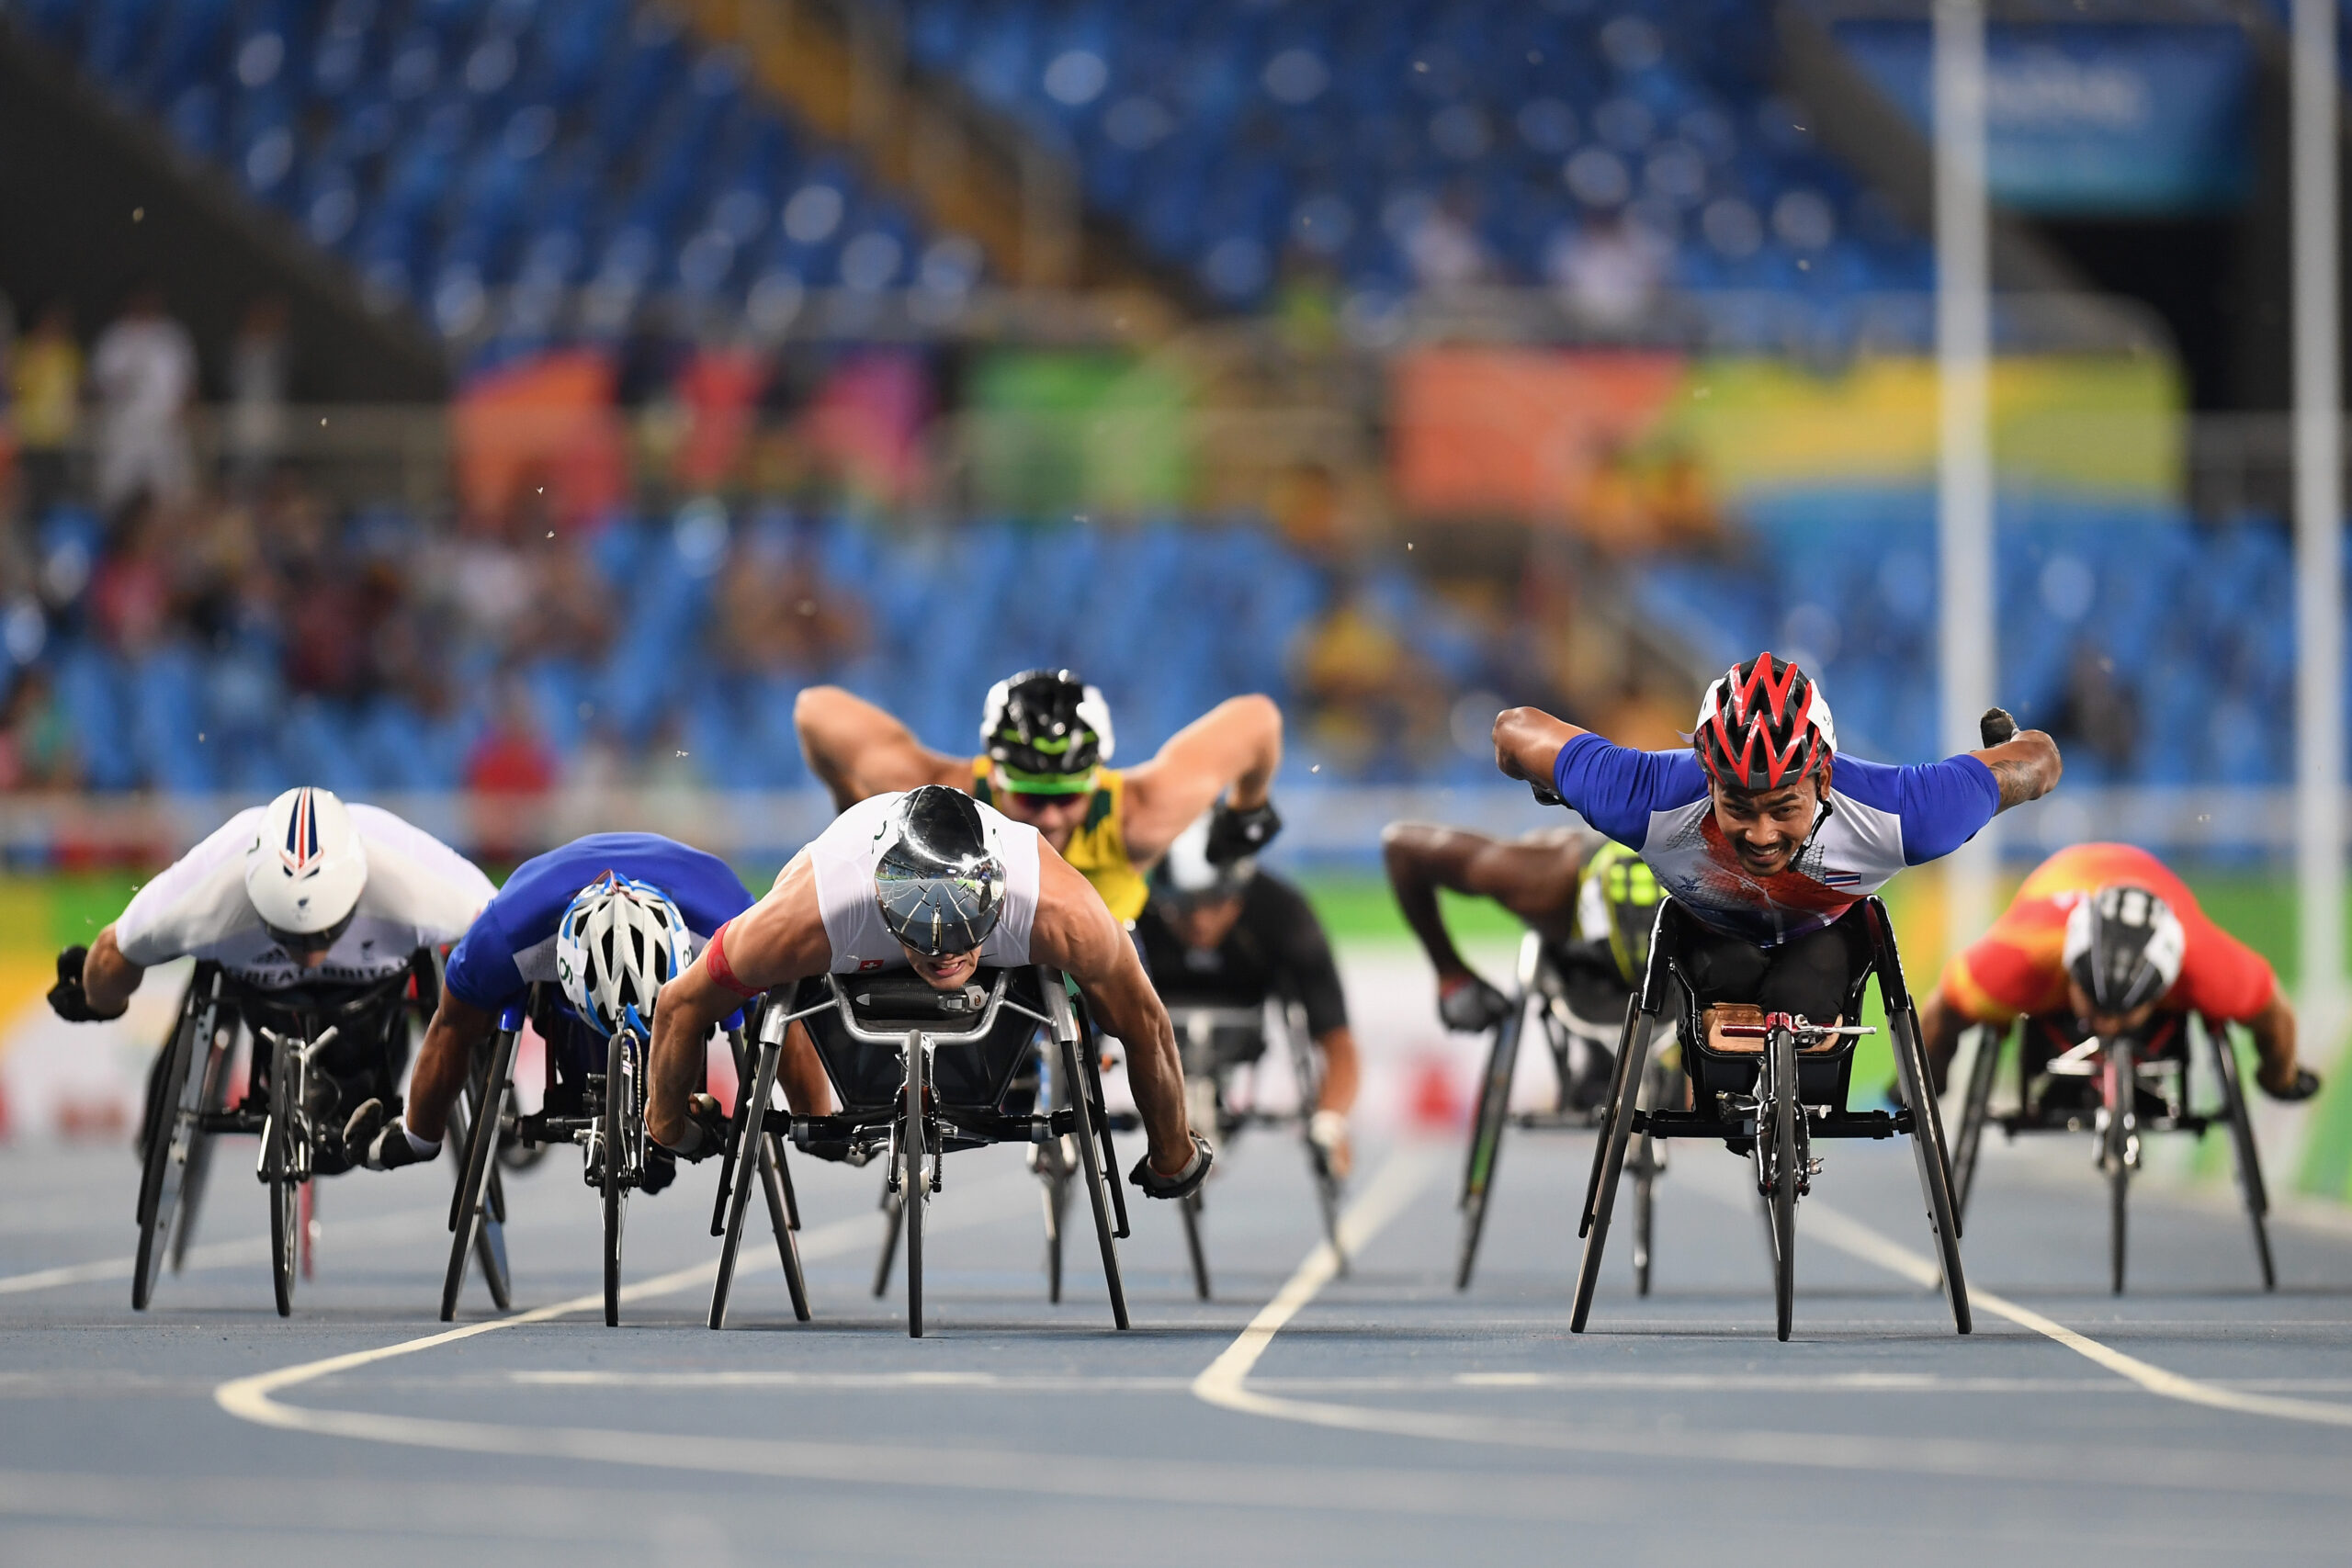 The competition schedule for the Paralympic Games is out!